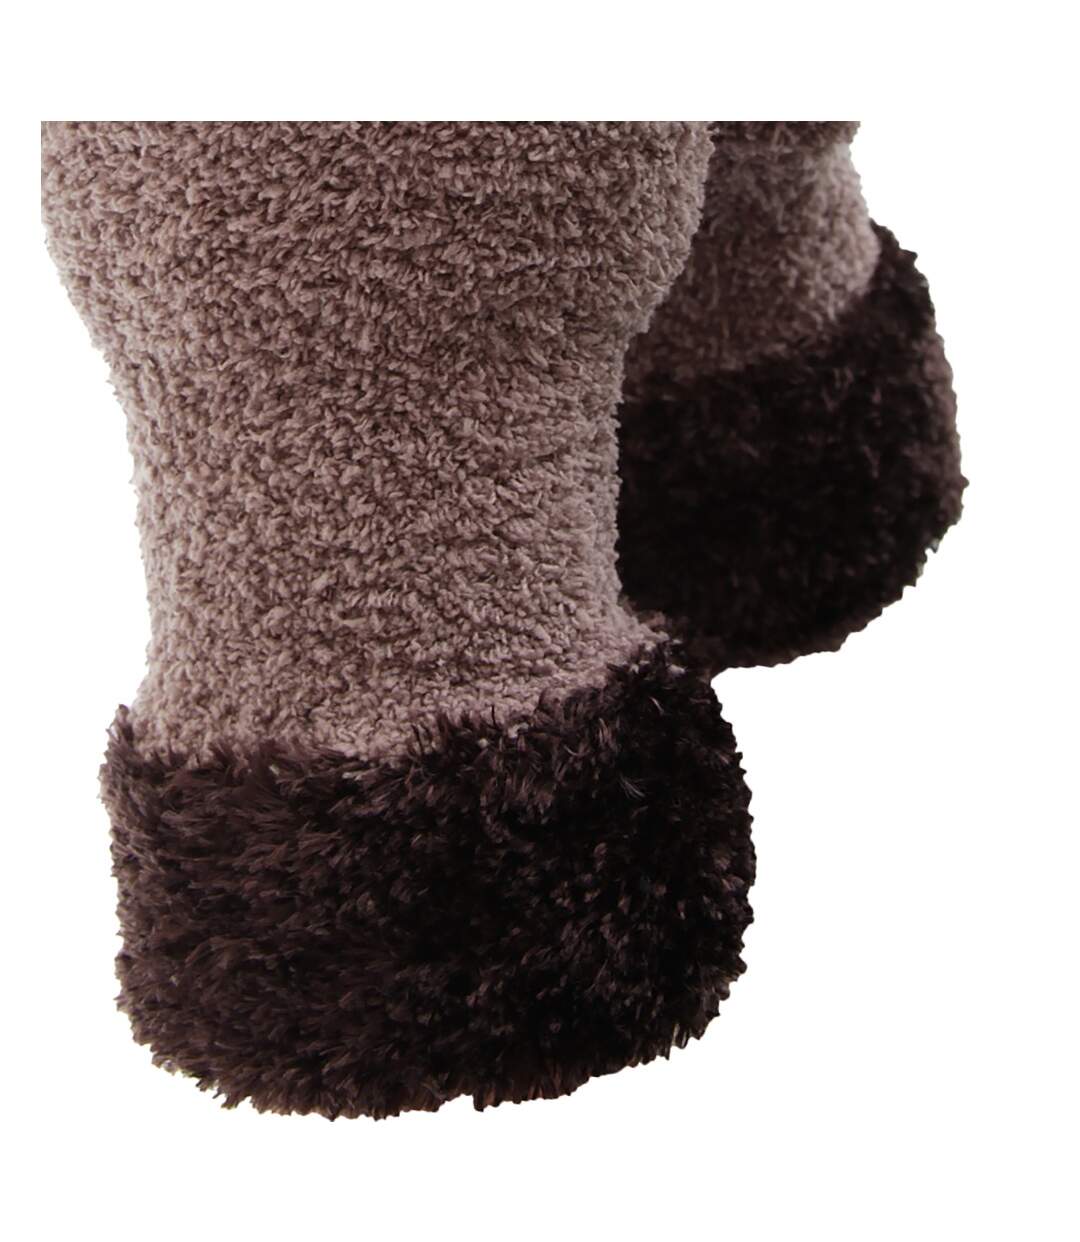 FLOSO Ladies/Womens Fluffy Extra Soft Winter Gloves with Patterned Cuff (Latte/Brown)